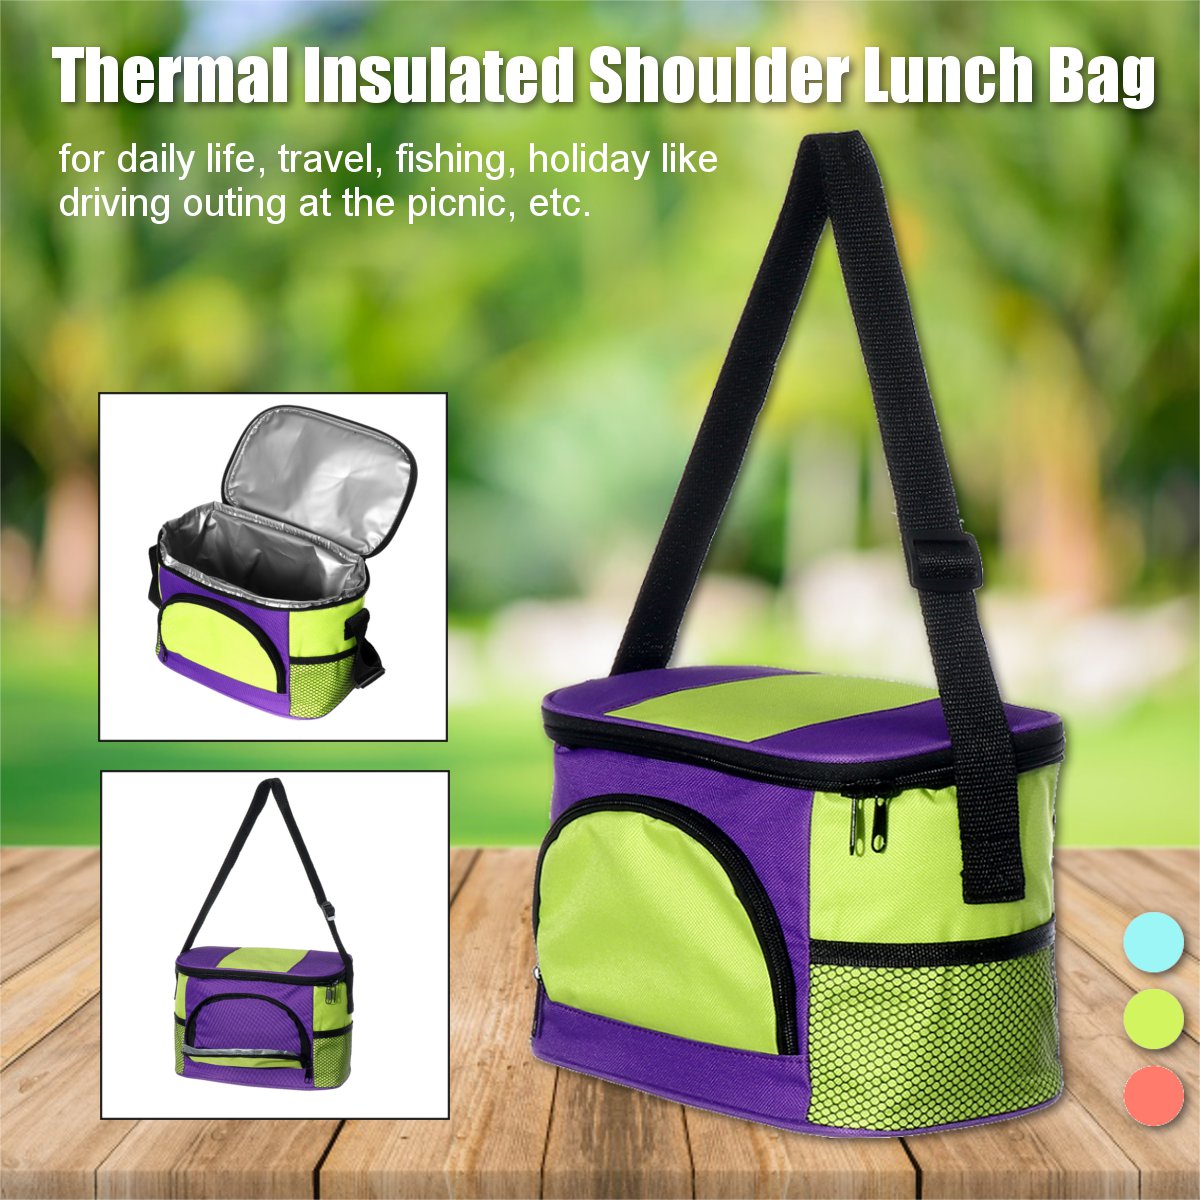 Thermal-Insulated-Shoulder-Lunch-Bag-Food-Pizza-Delivery-Picnic-Storage-Bag-1842984-1